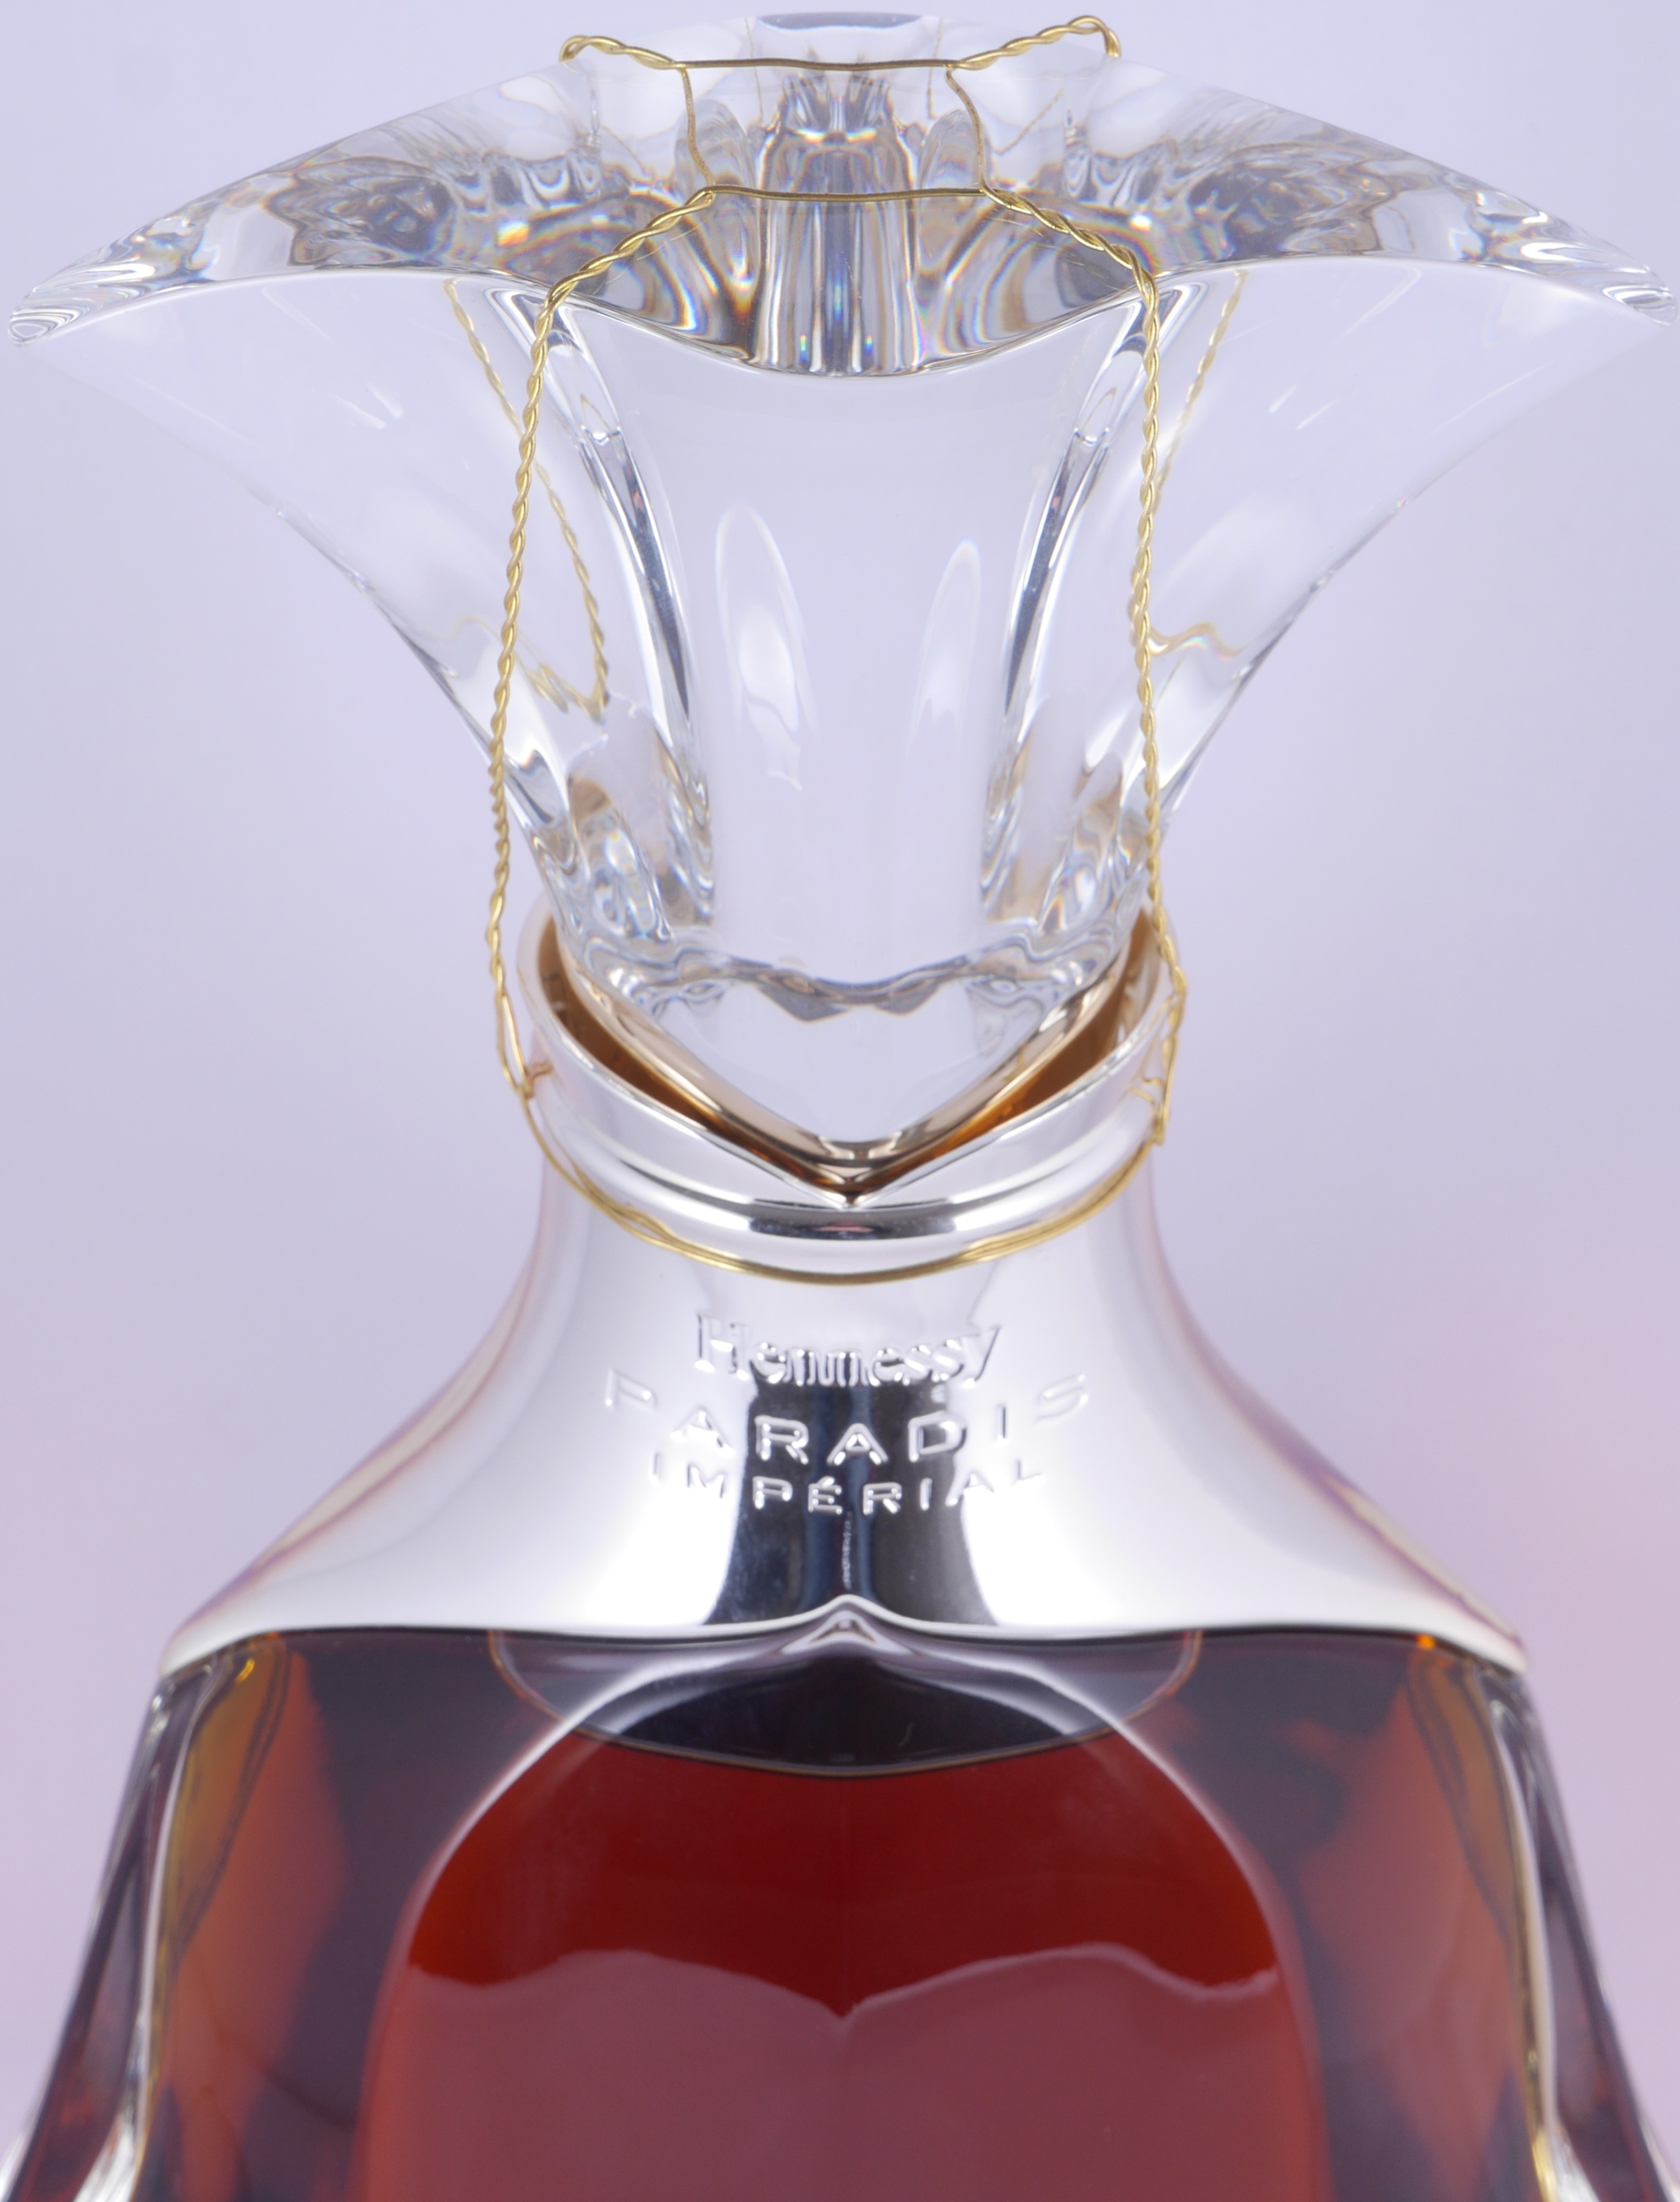 Hennessy Cognac Paradis Imperial